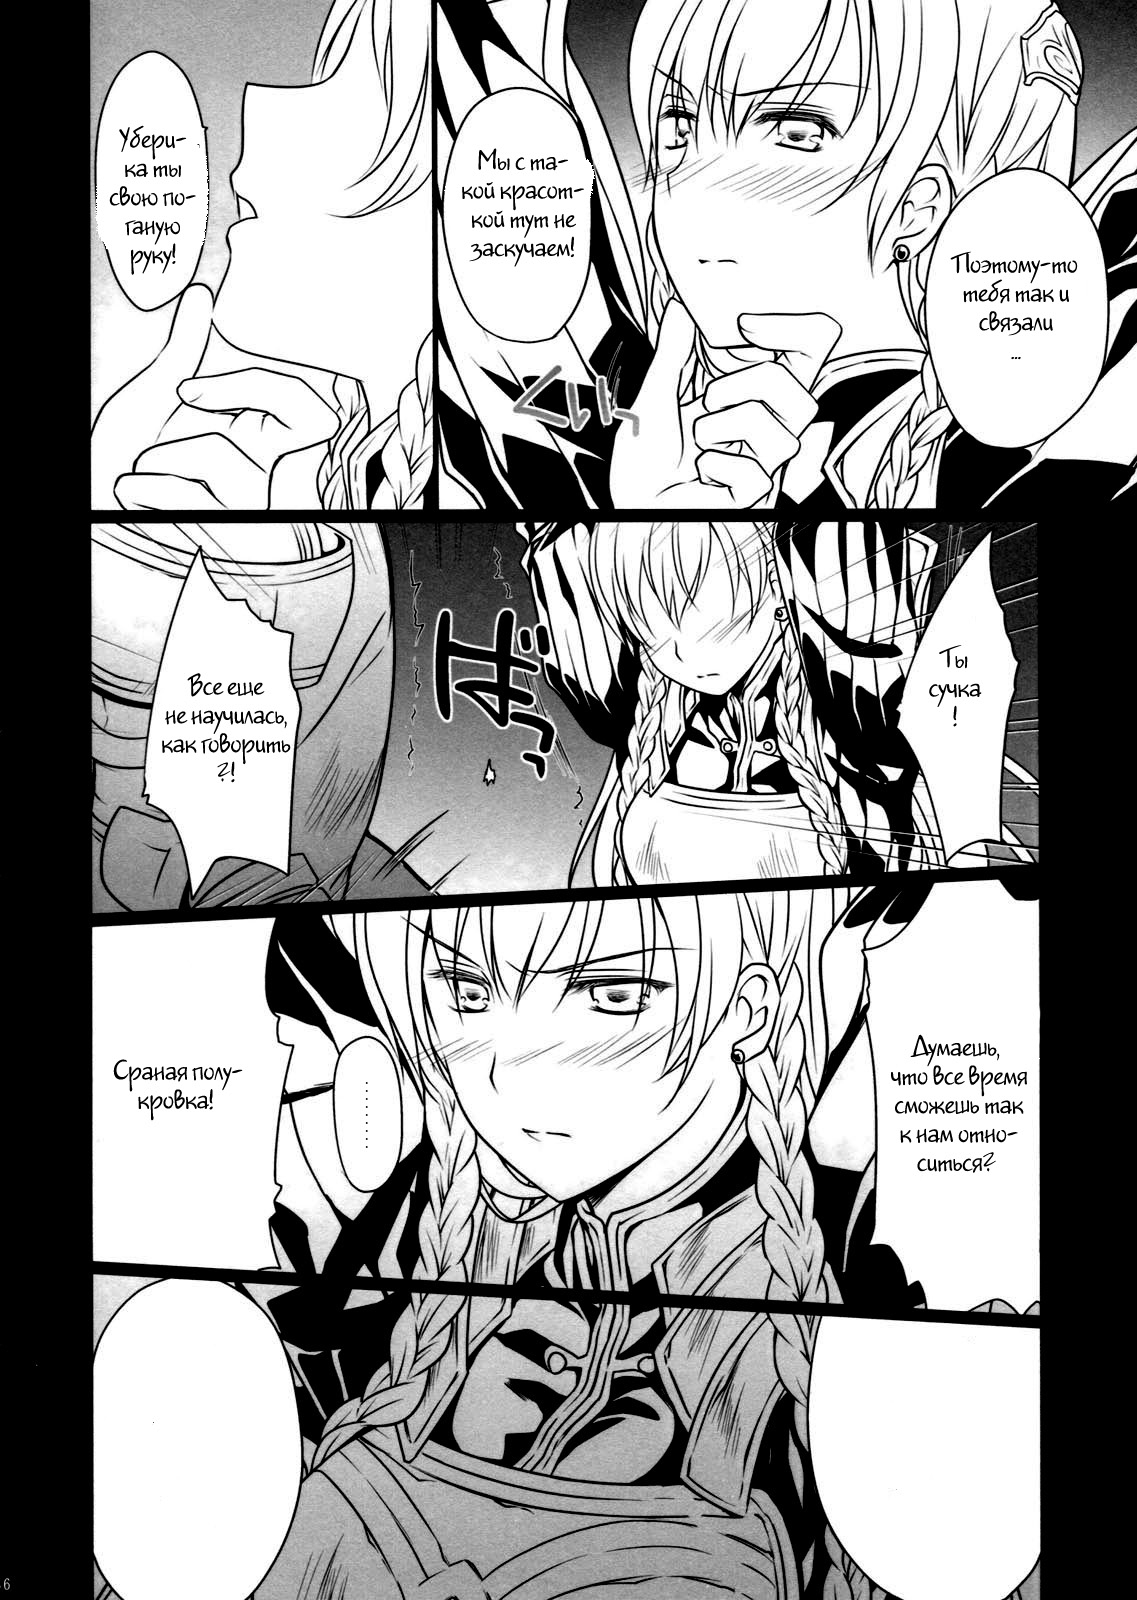 (COMIC1☆5) [LOVE# (Louis&Visee)] BLOOD ROYAL (Tactics Ogre: Wheel of Fate) [Russian] [Witcher000] 4